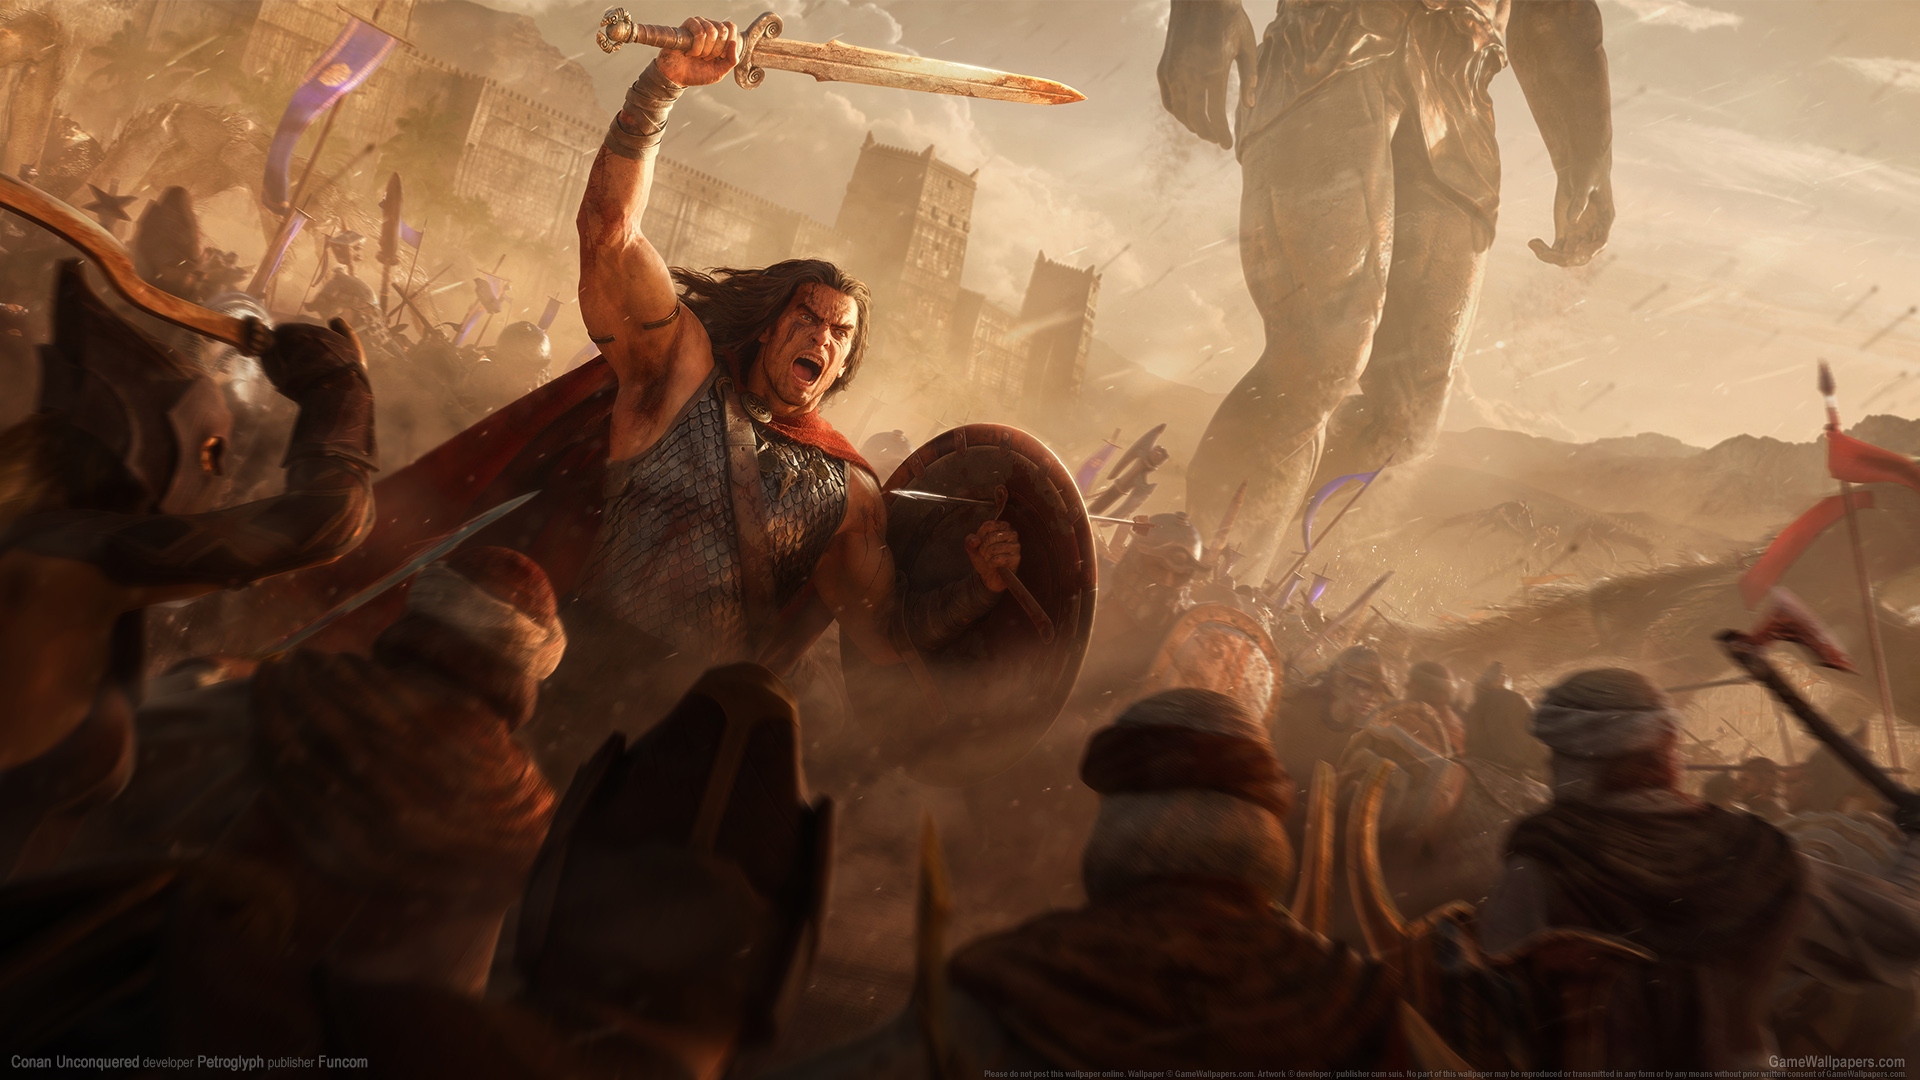 Conan Unconquered 1920x1080 wallpaper or background 01